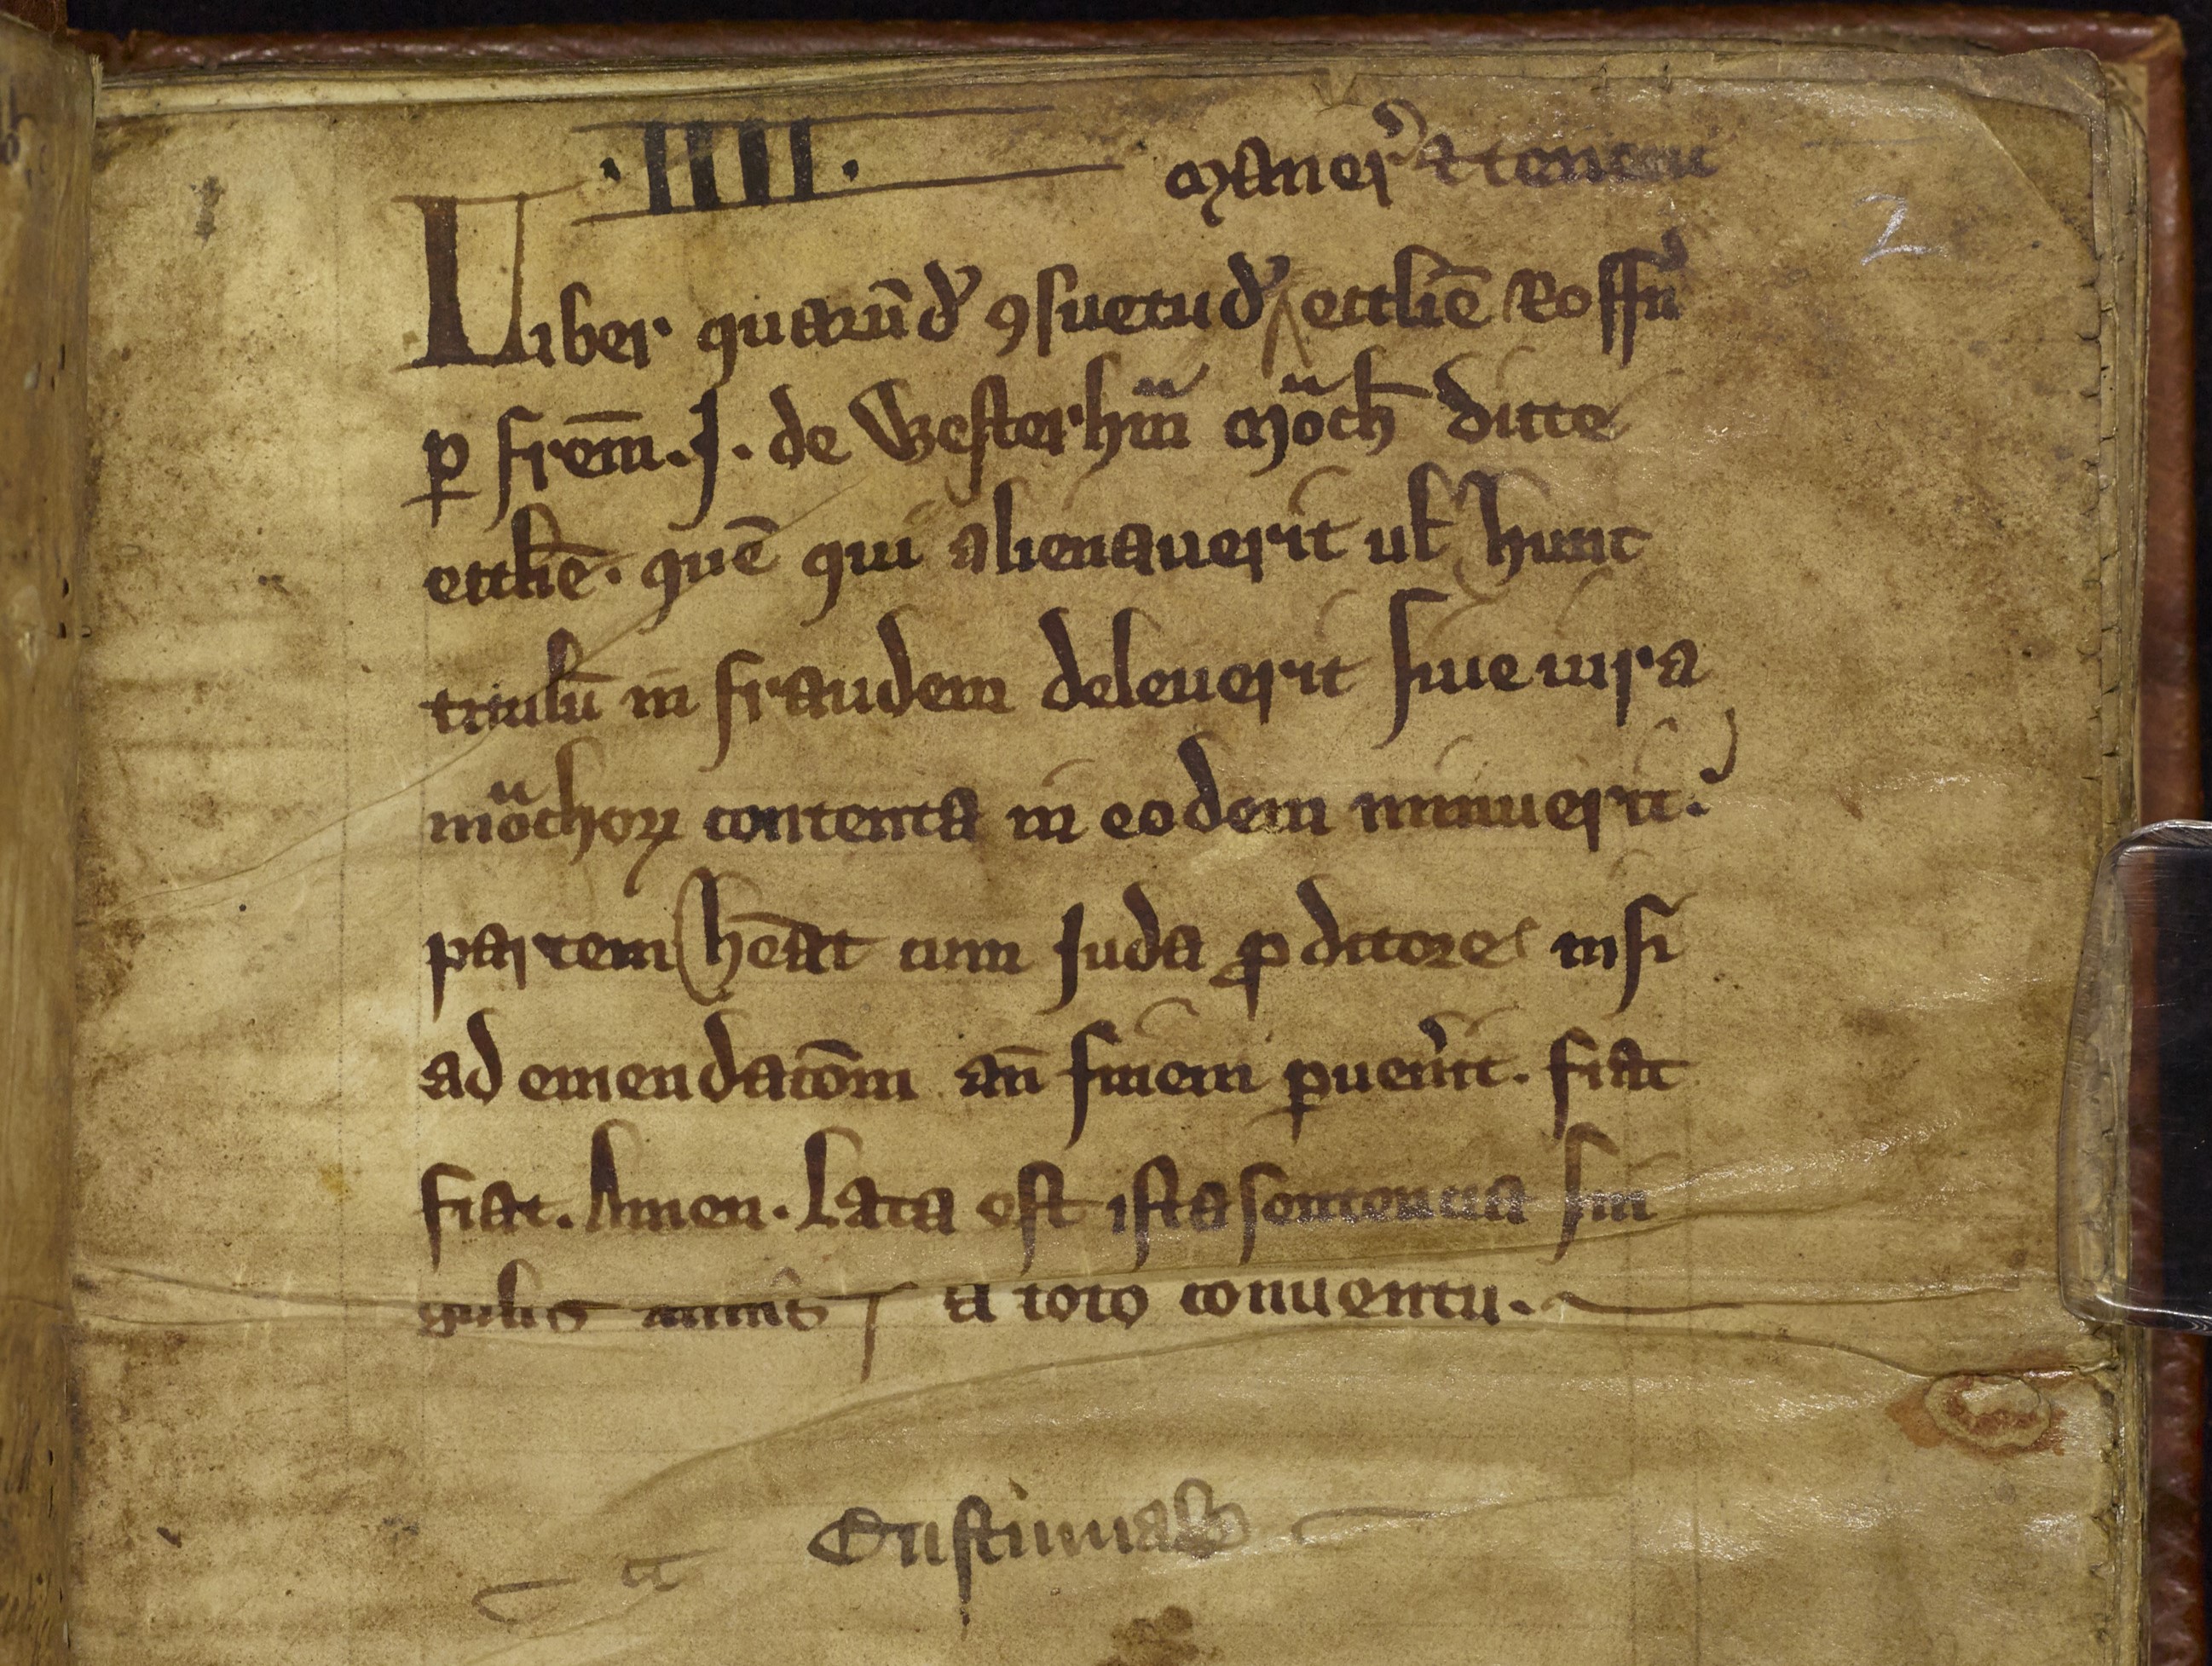 Custumale Roffense, folio 2r, featuring the title page and book curse.